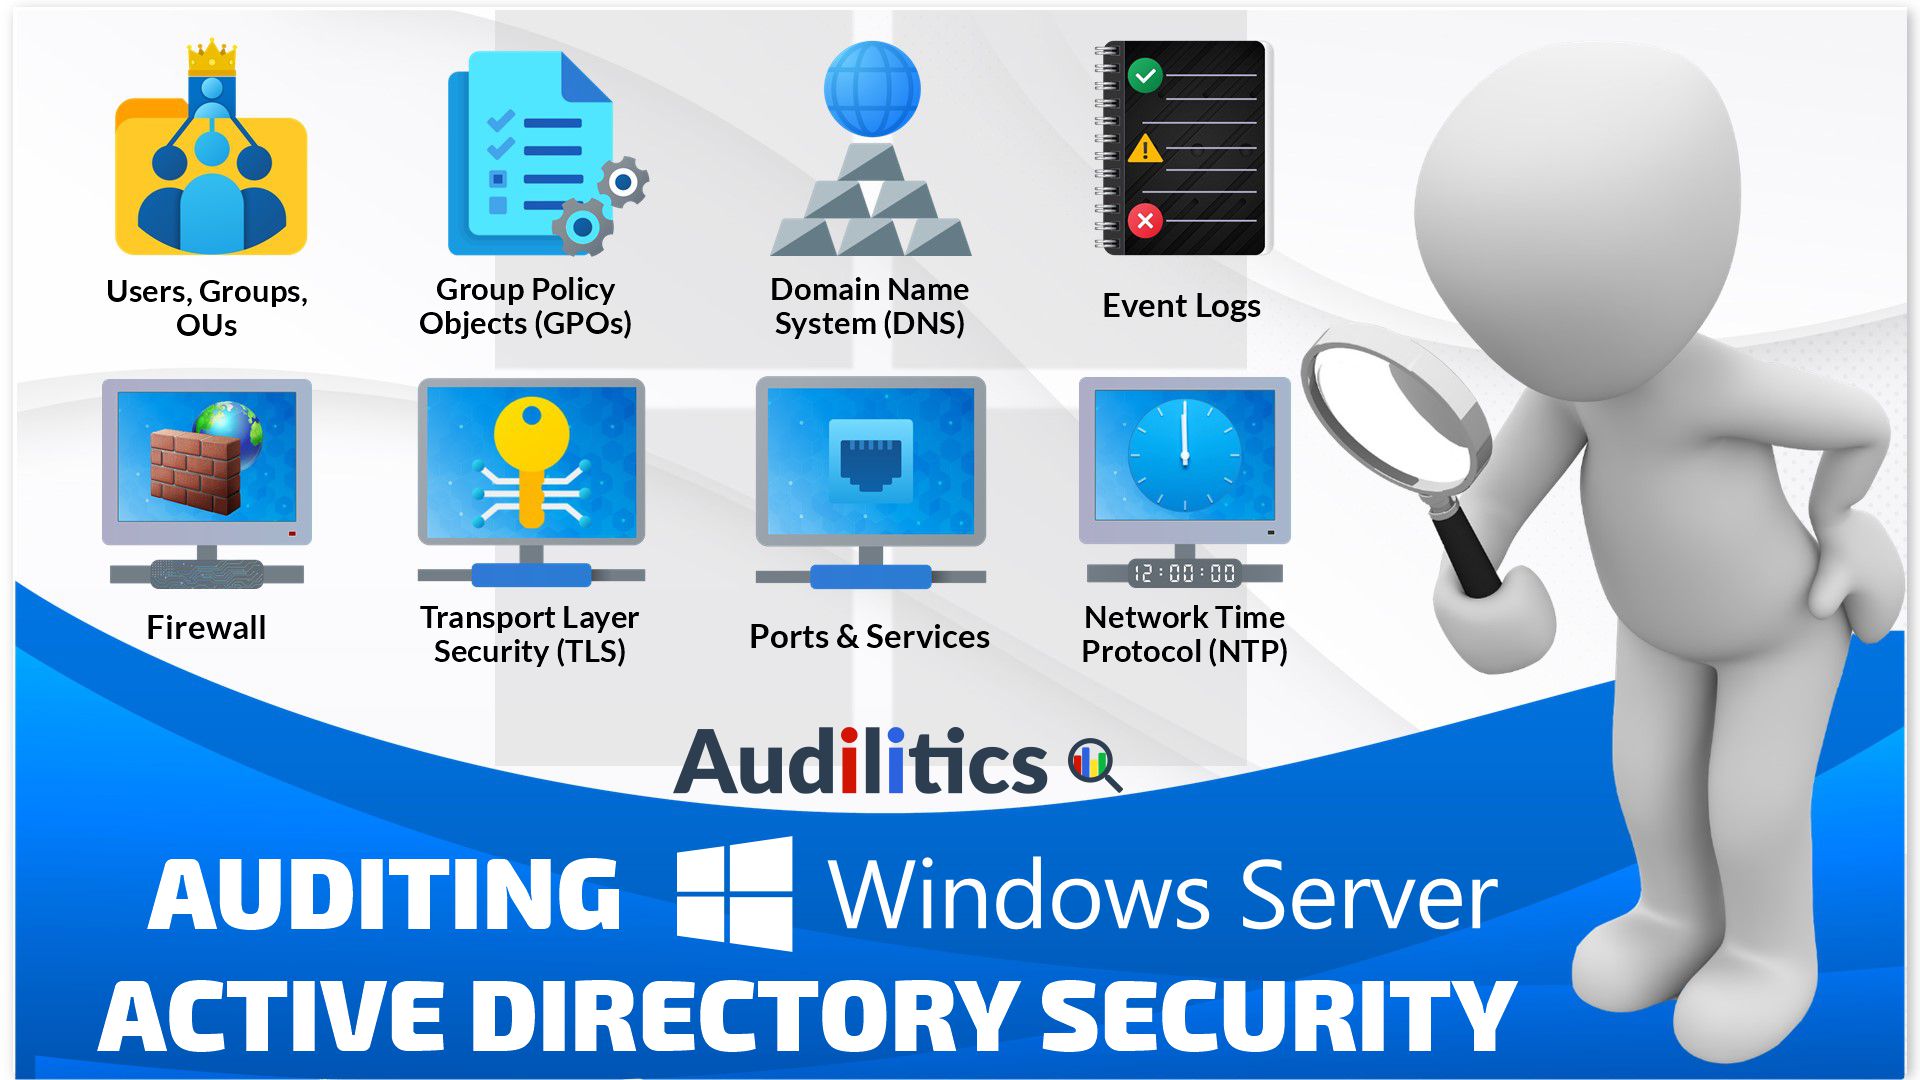 Auditing Windows Server Active Directory Security